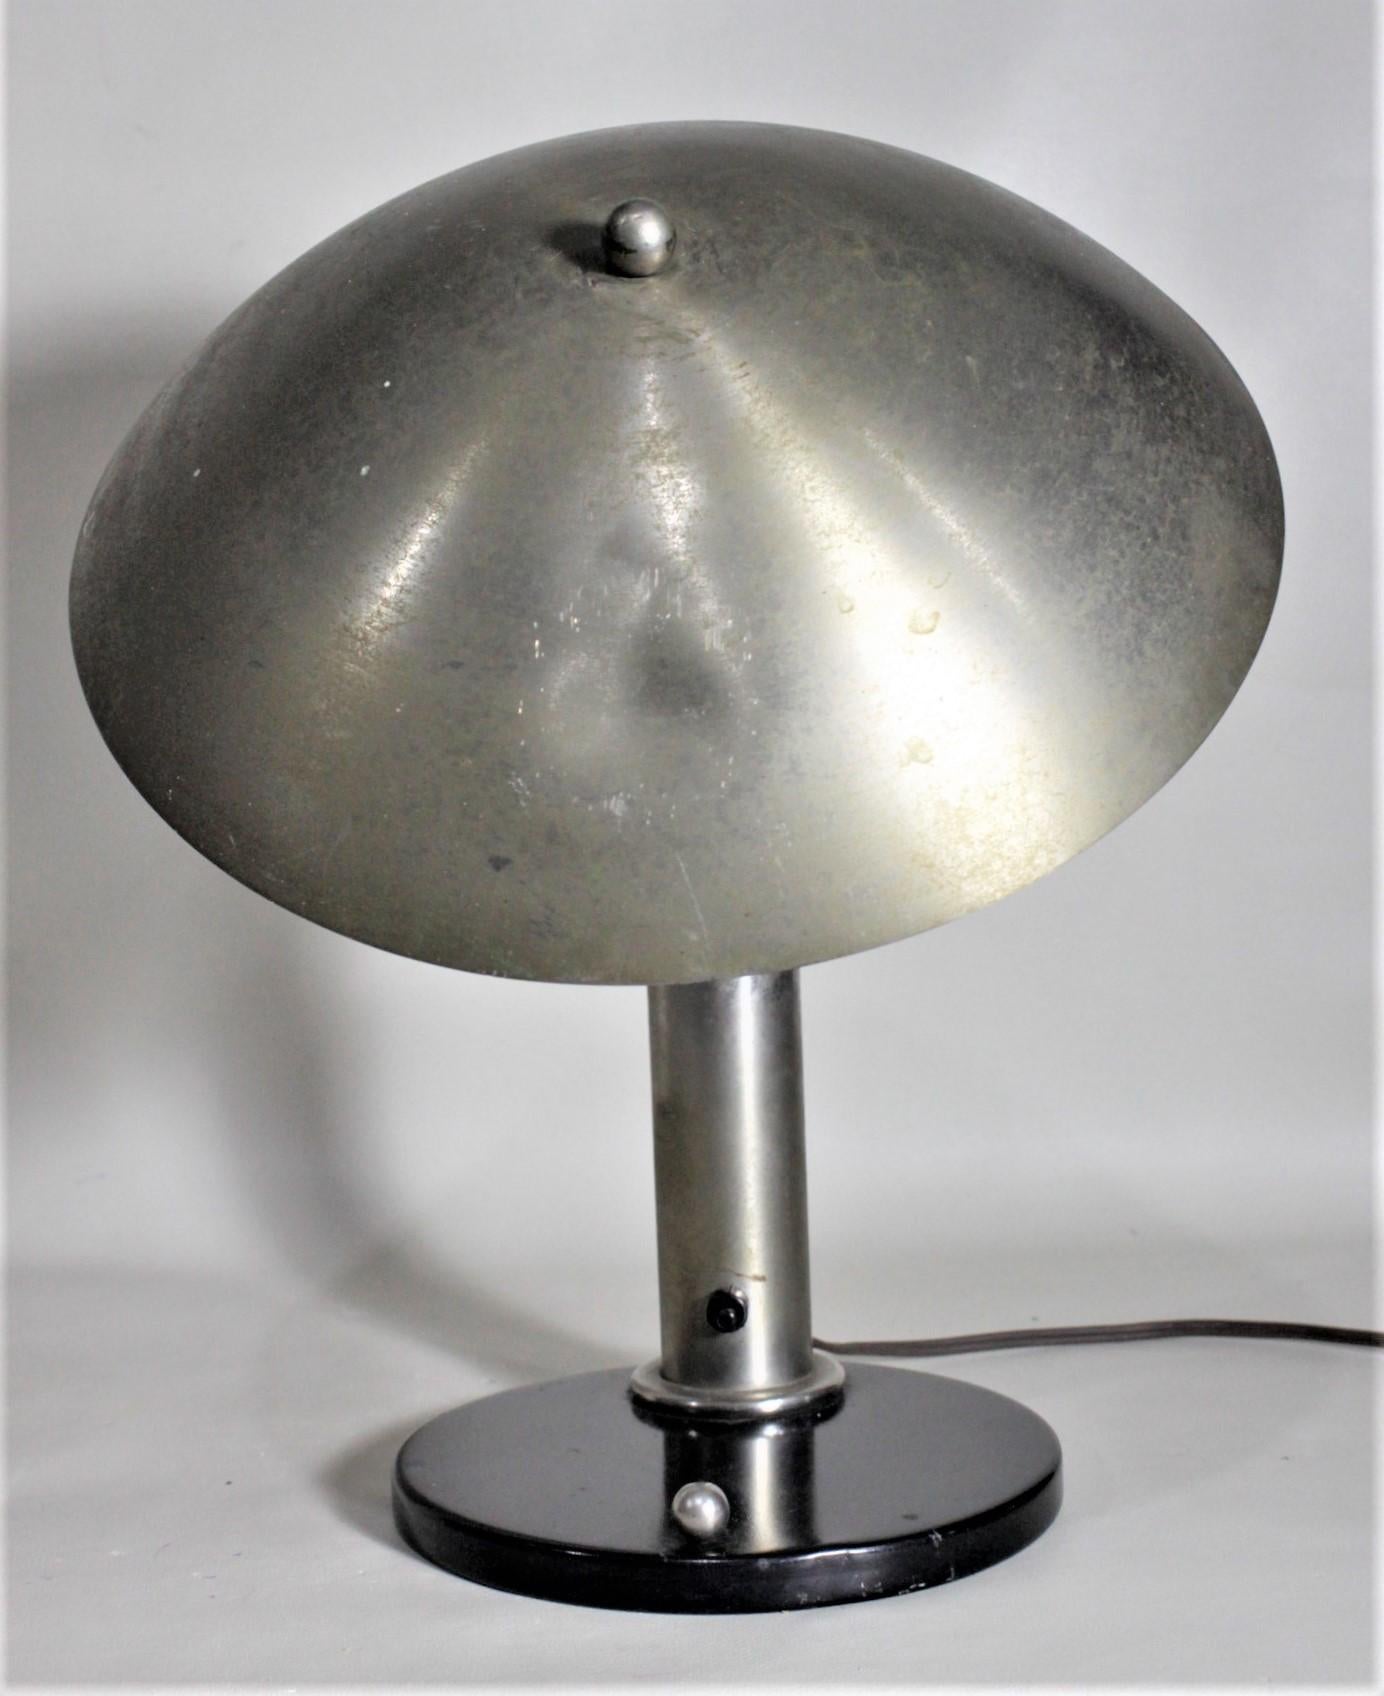 American Mid-Century Modern Space Age Flying Saucer Styled Desk or Table Lamp